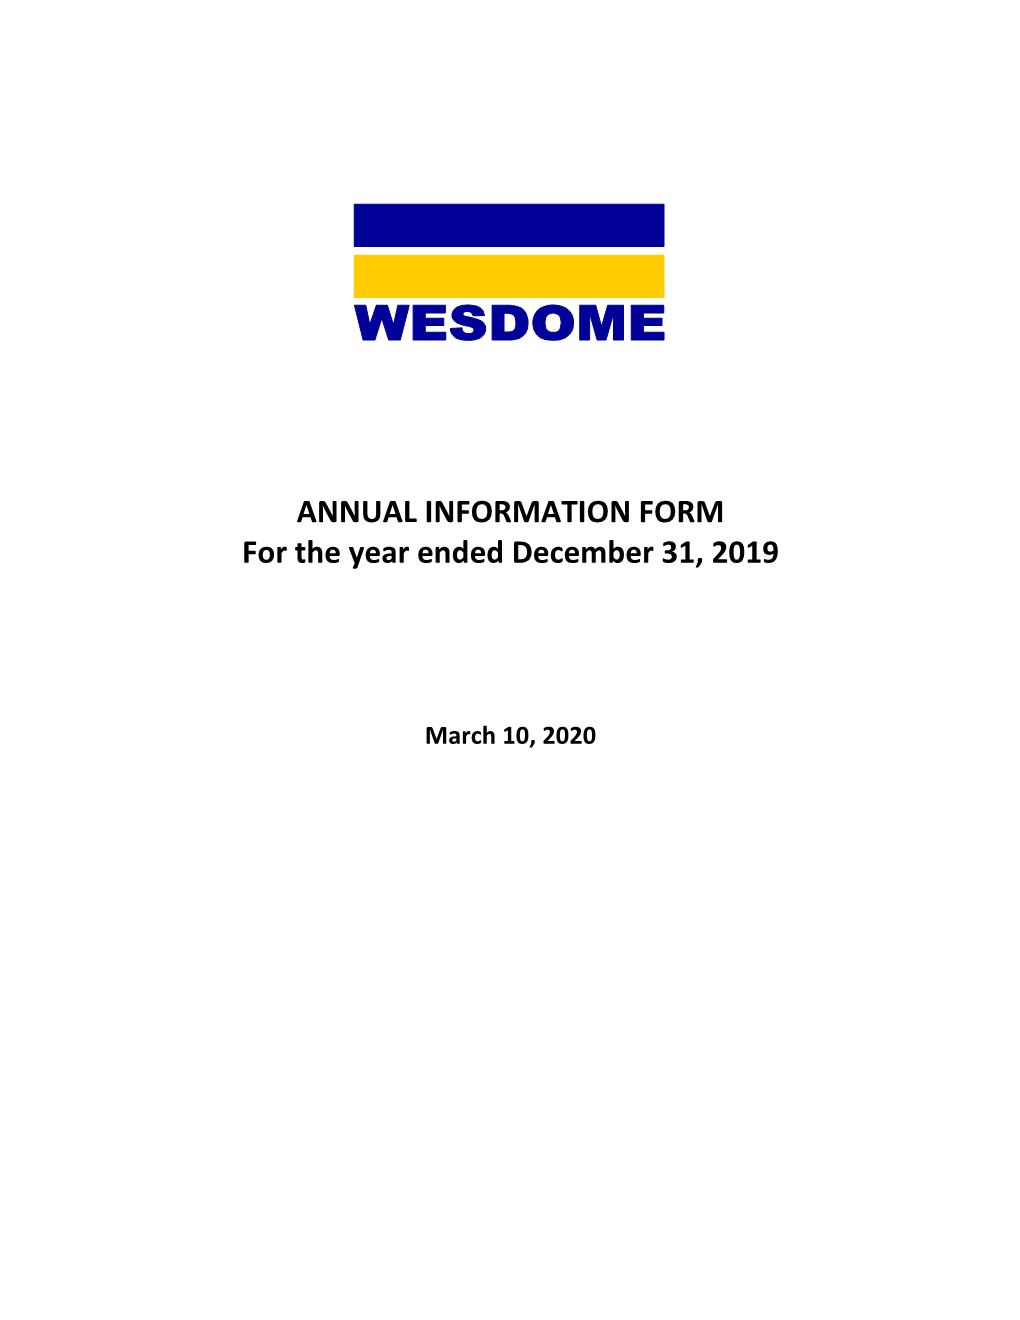 ANNUAL INFORMATION FORM for the Year Ended December 31, 2019